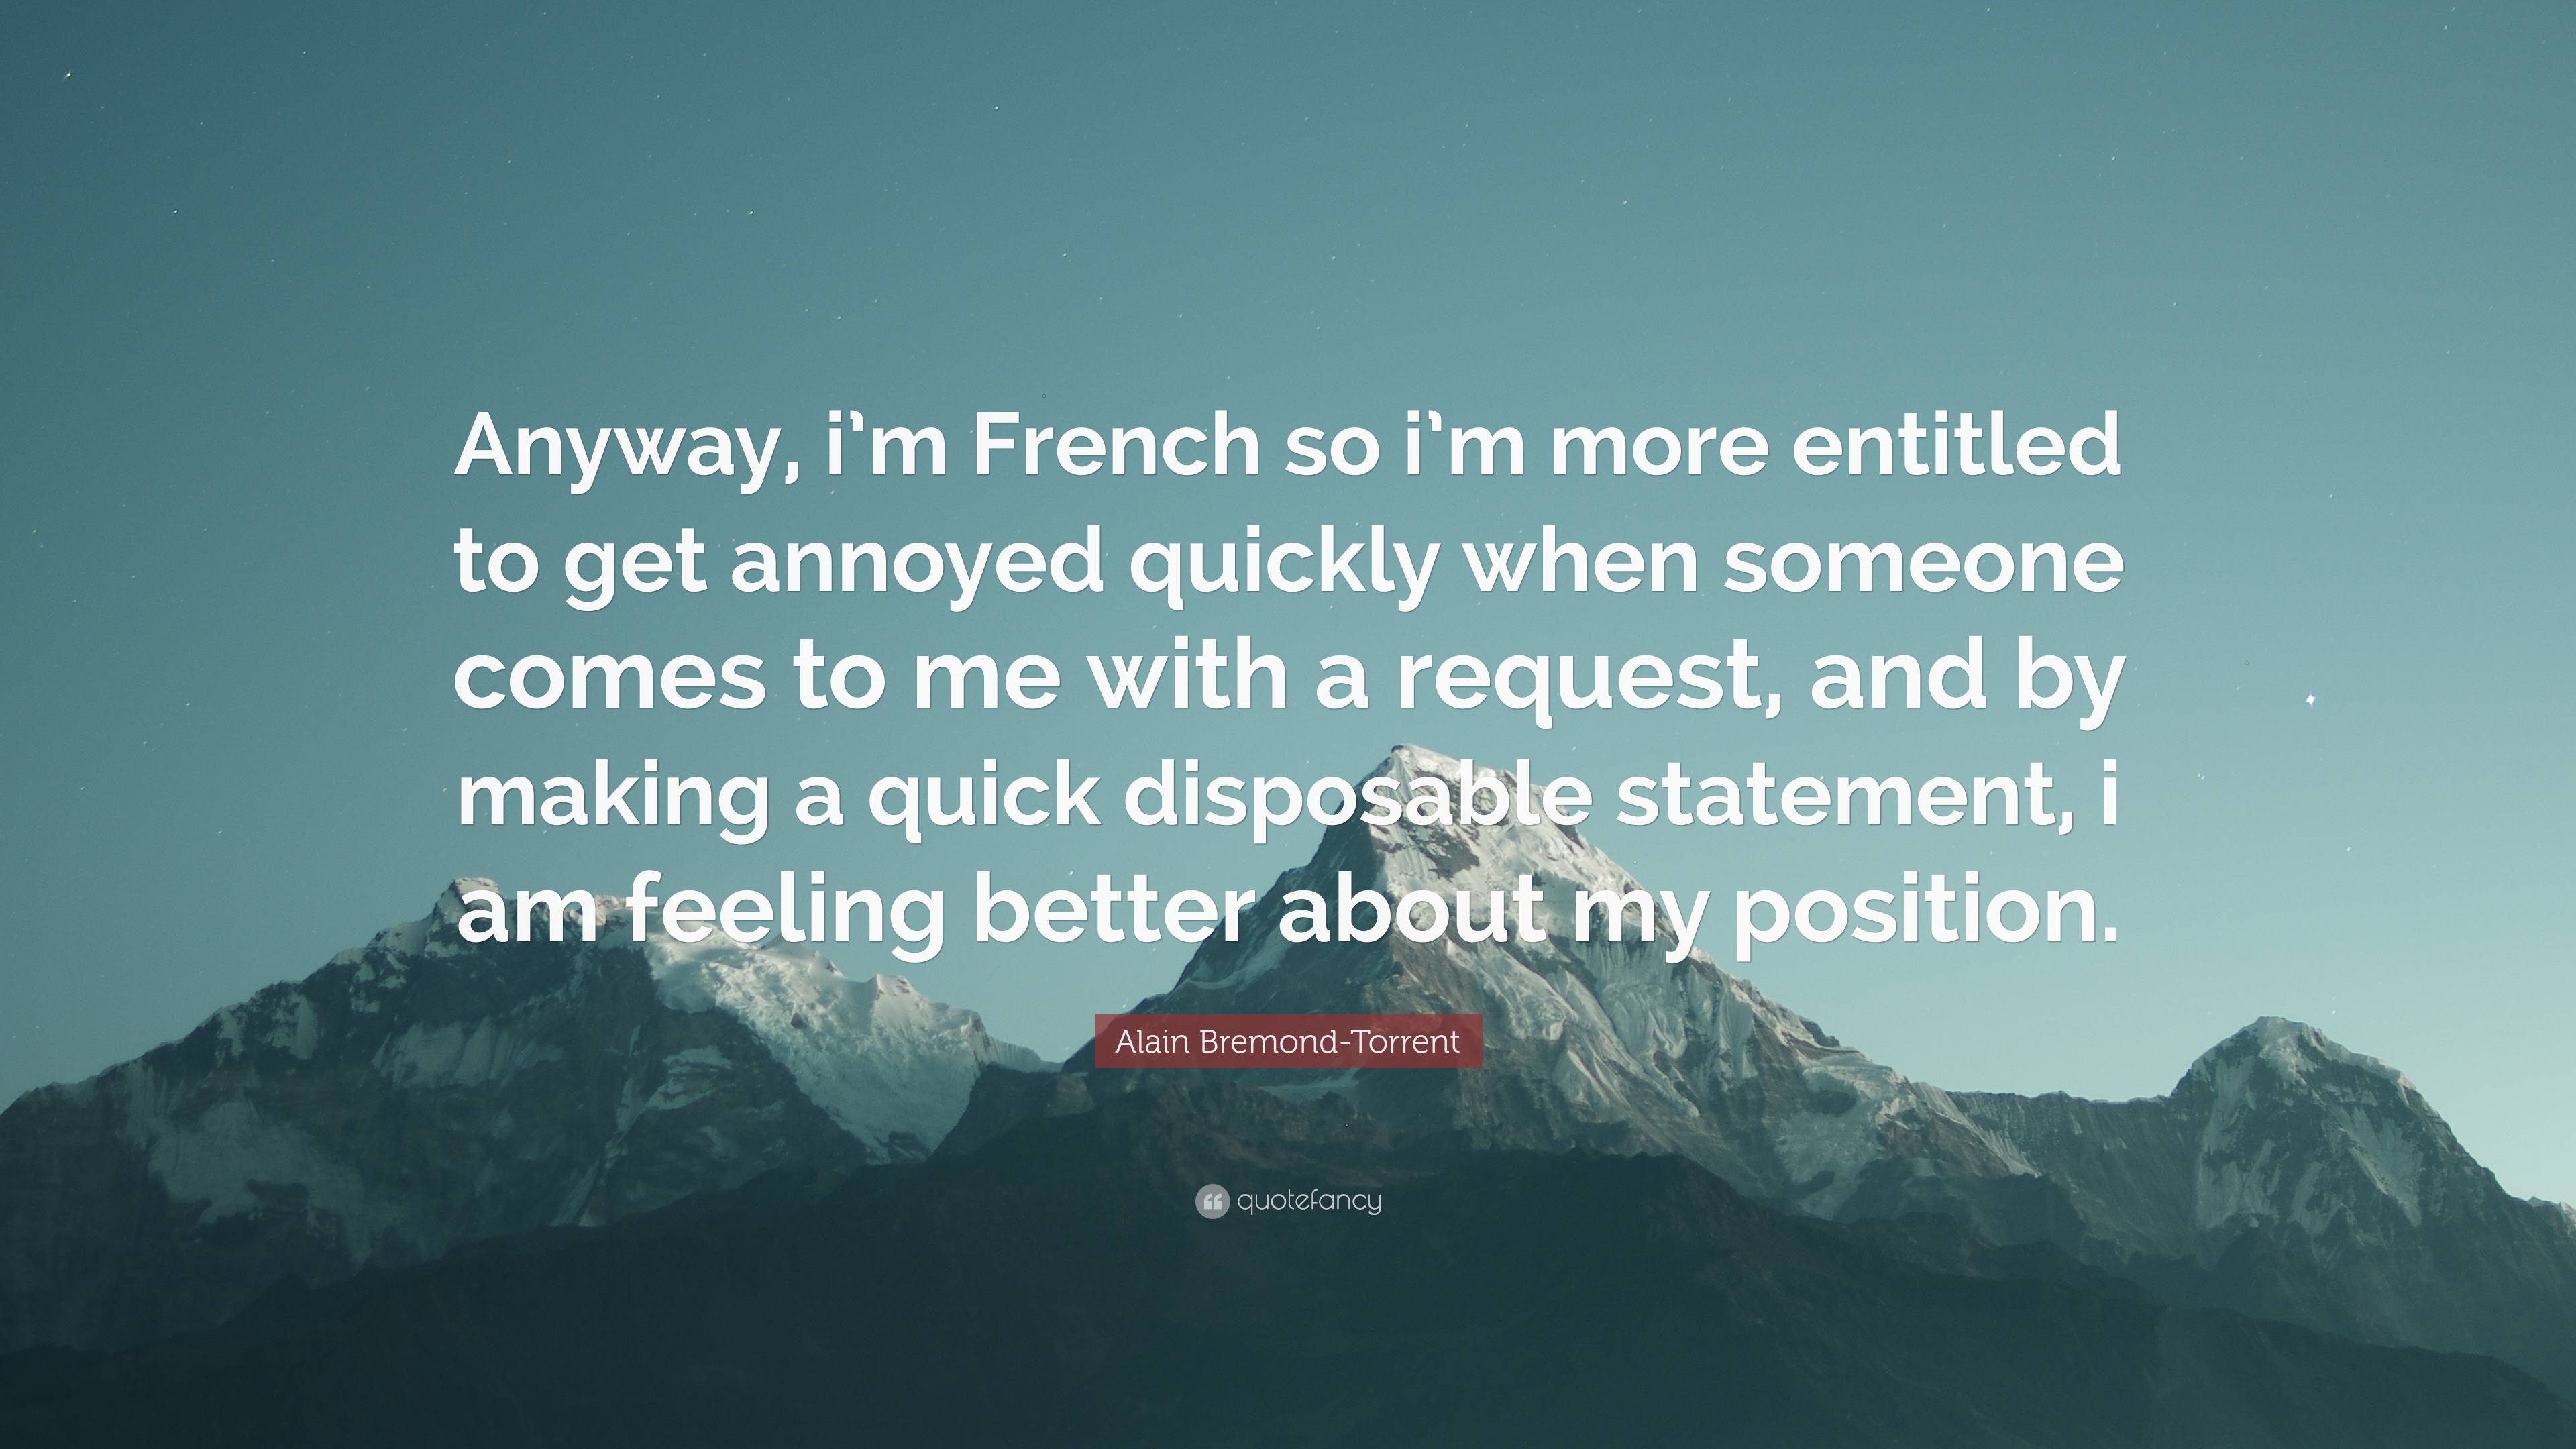 Alain Bremond-Torrent Quote: “Anyway, i’m French so i’m more entitled ...